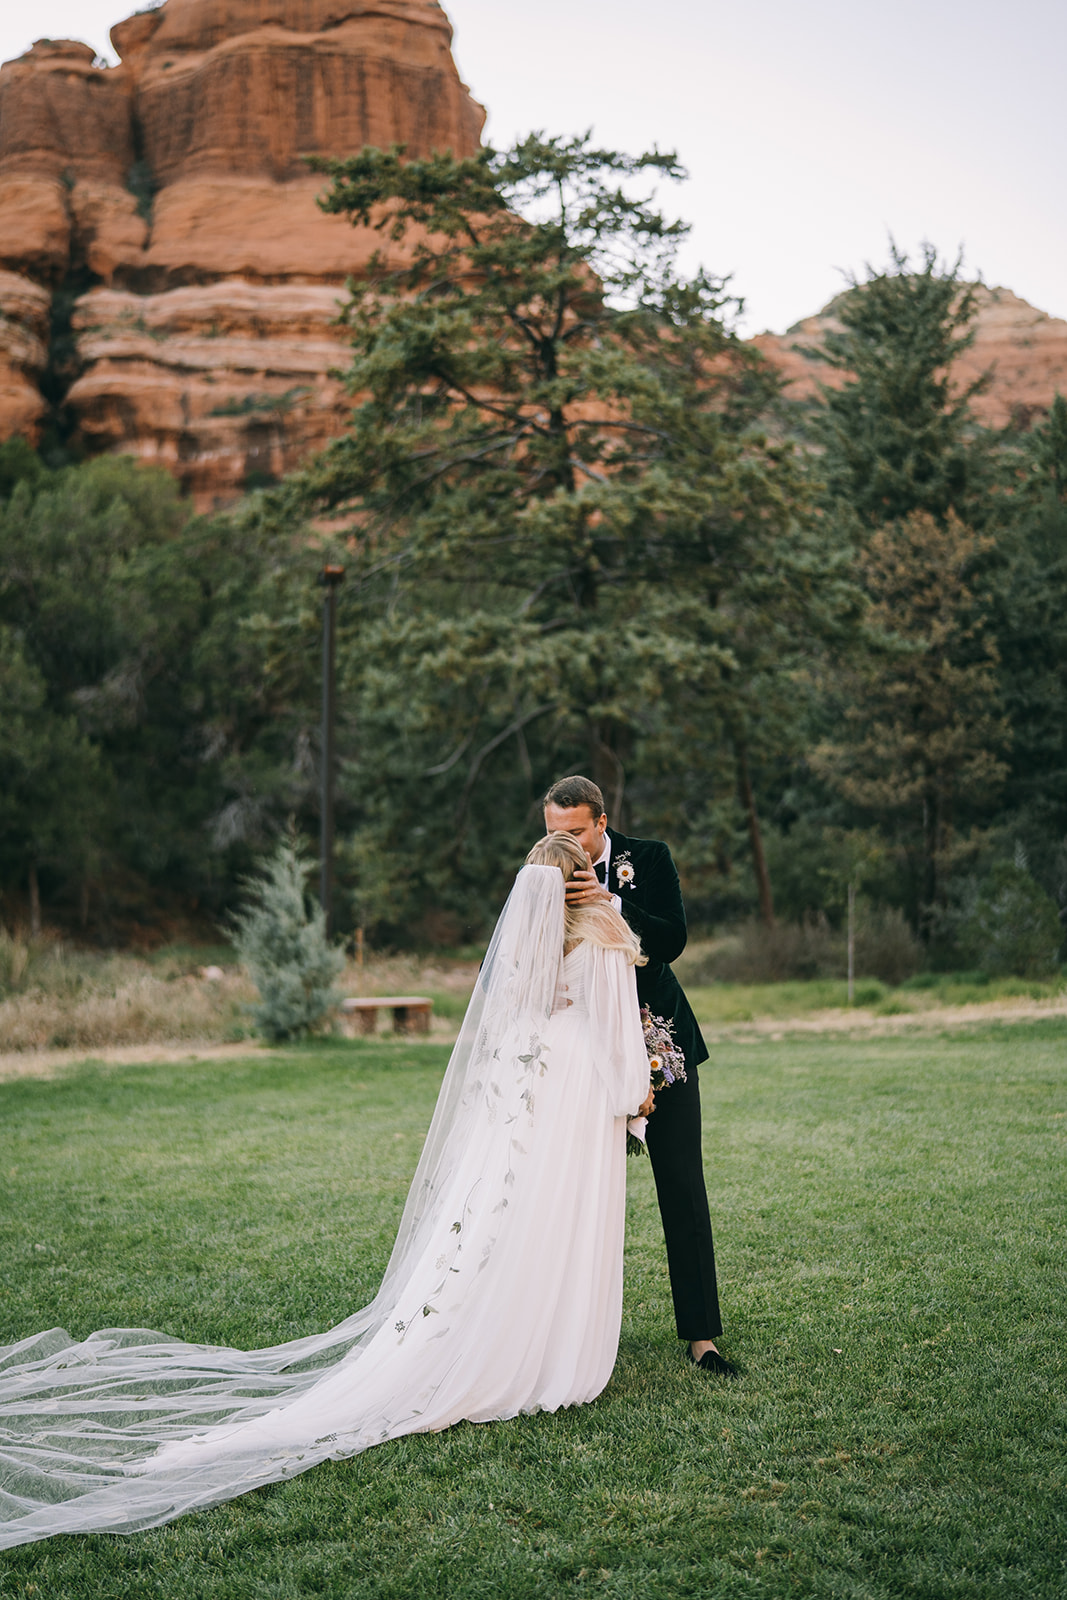 Groom kissing the bride with Sedona mountains in background with the bridal veil flowing